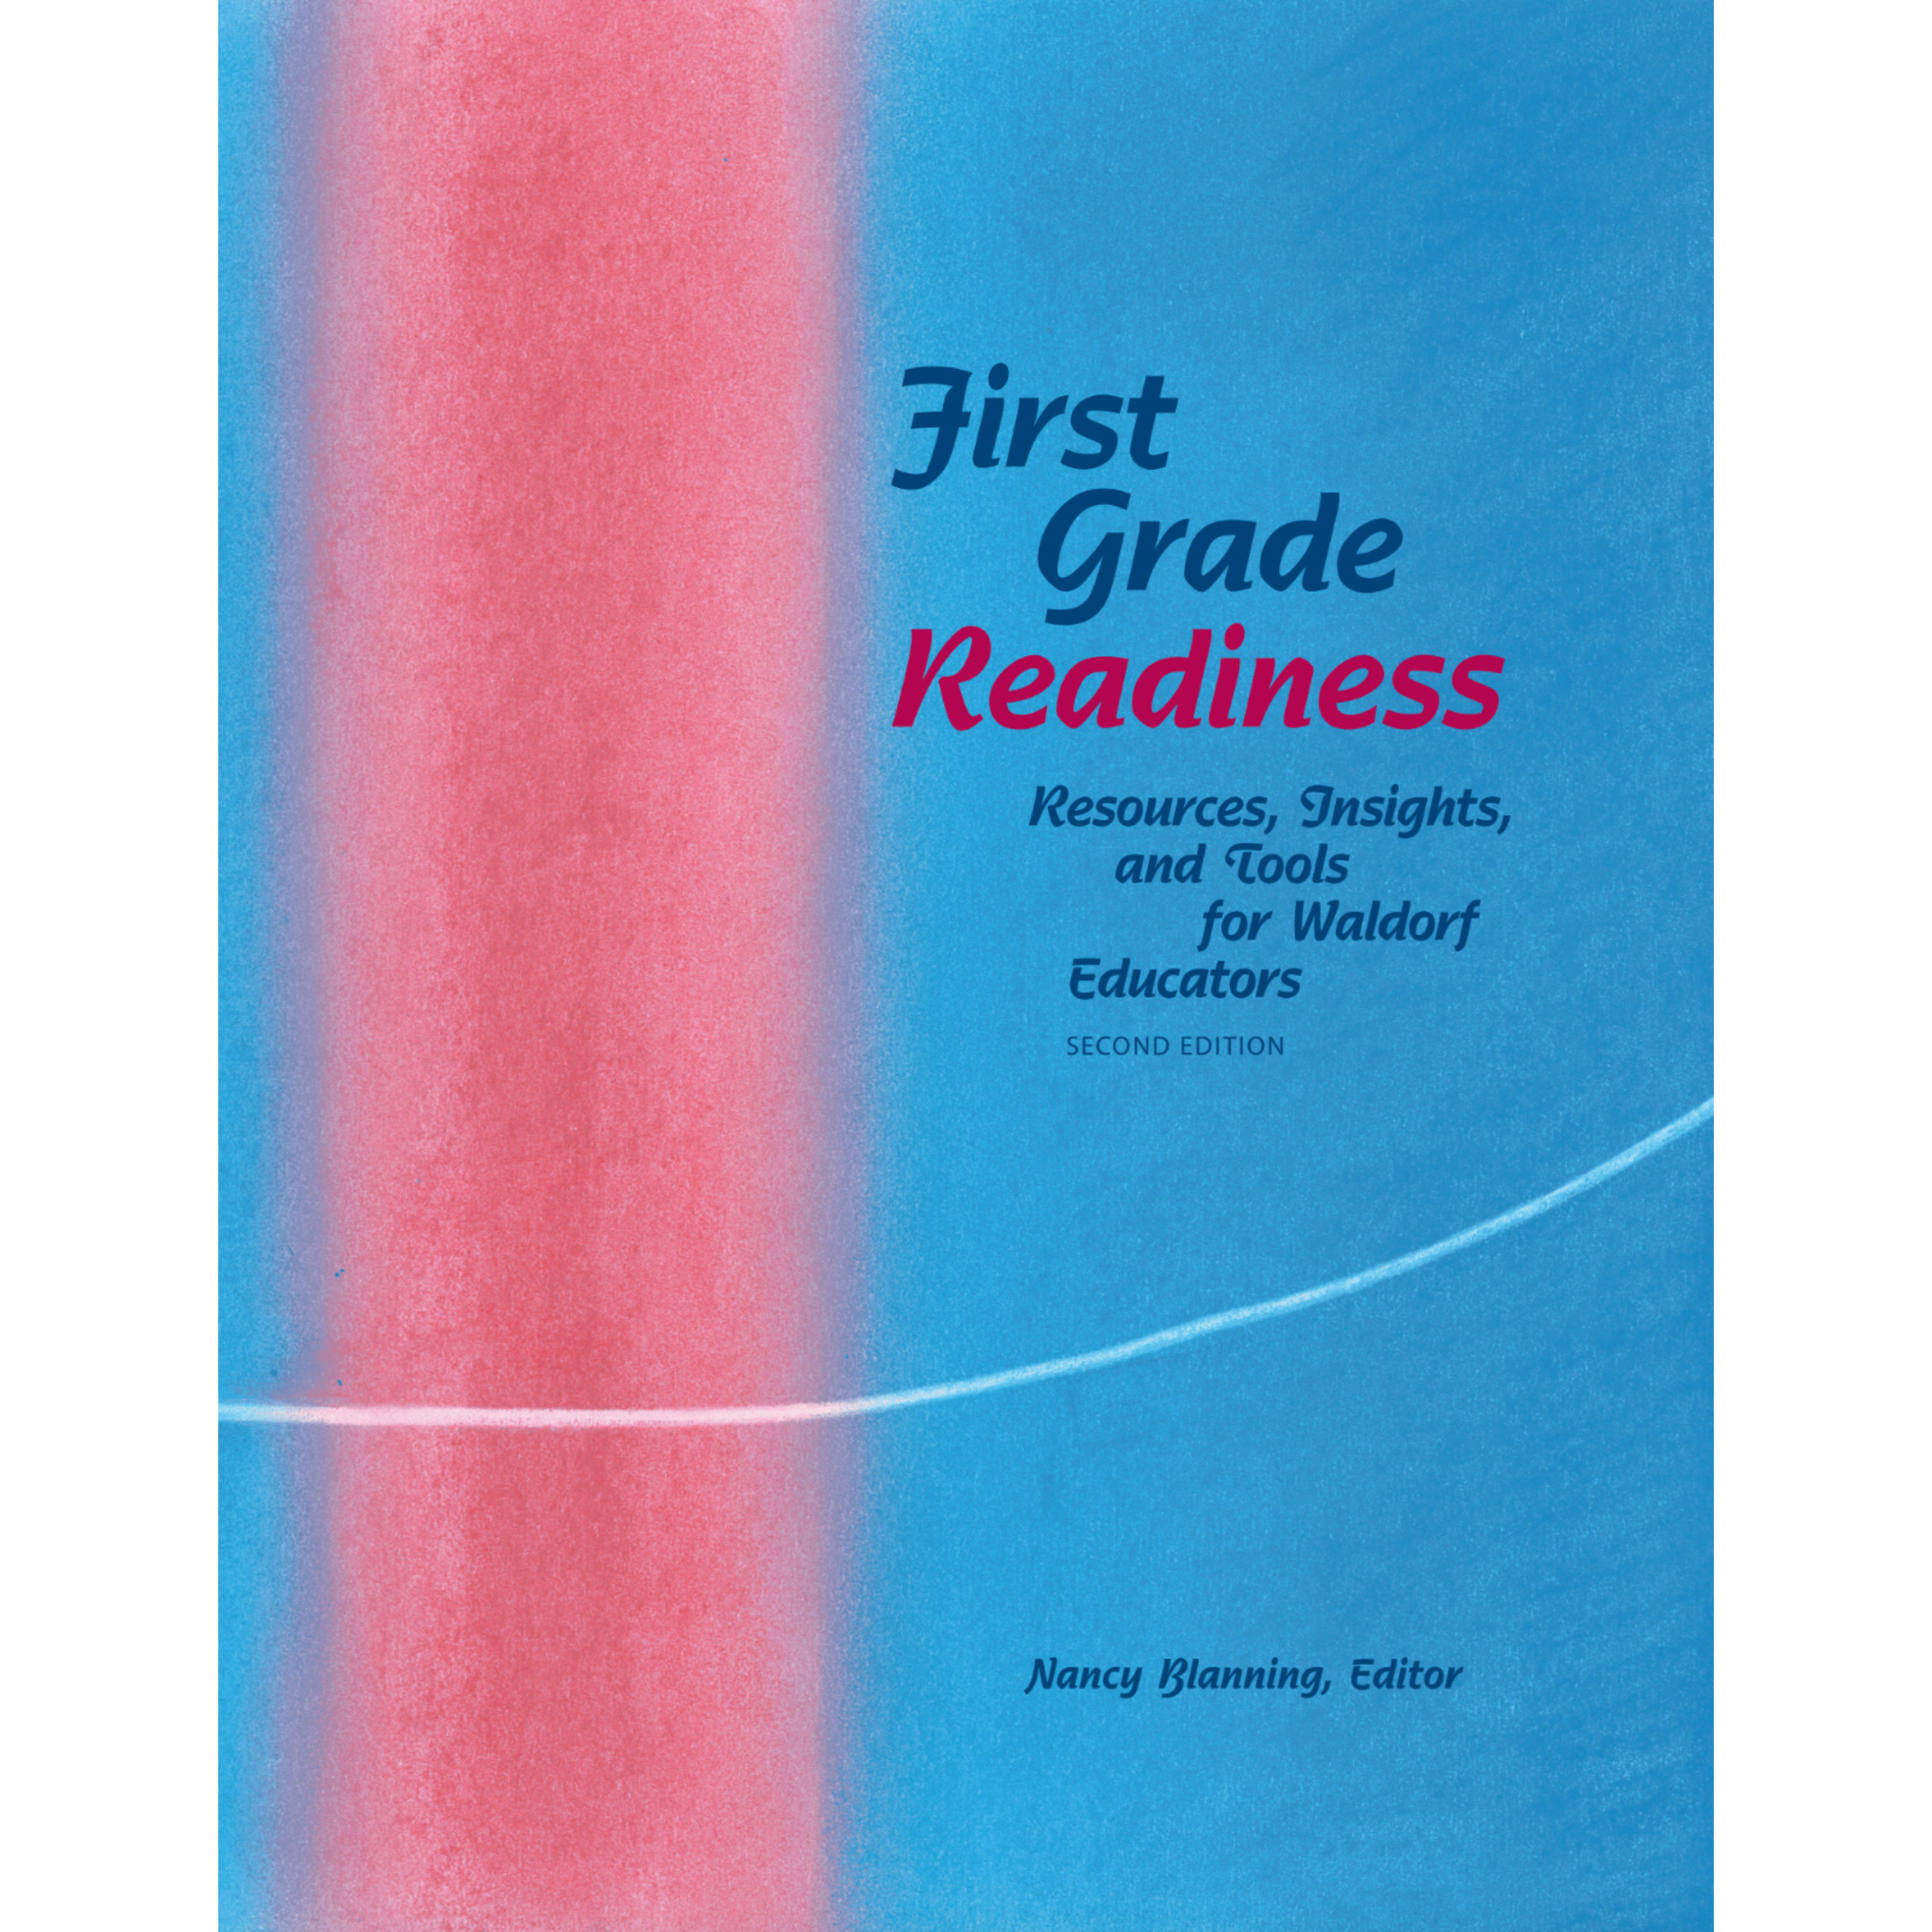 First Grade Readiness (Second Edition)